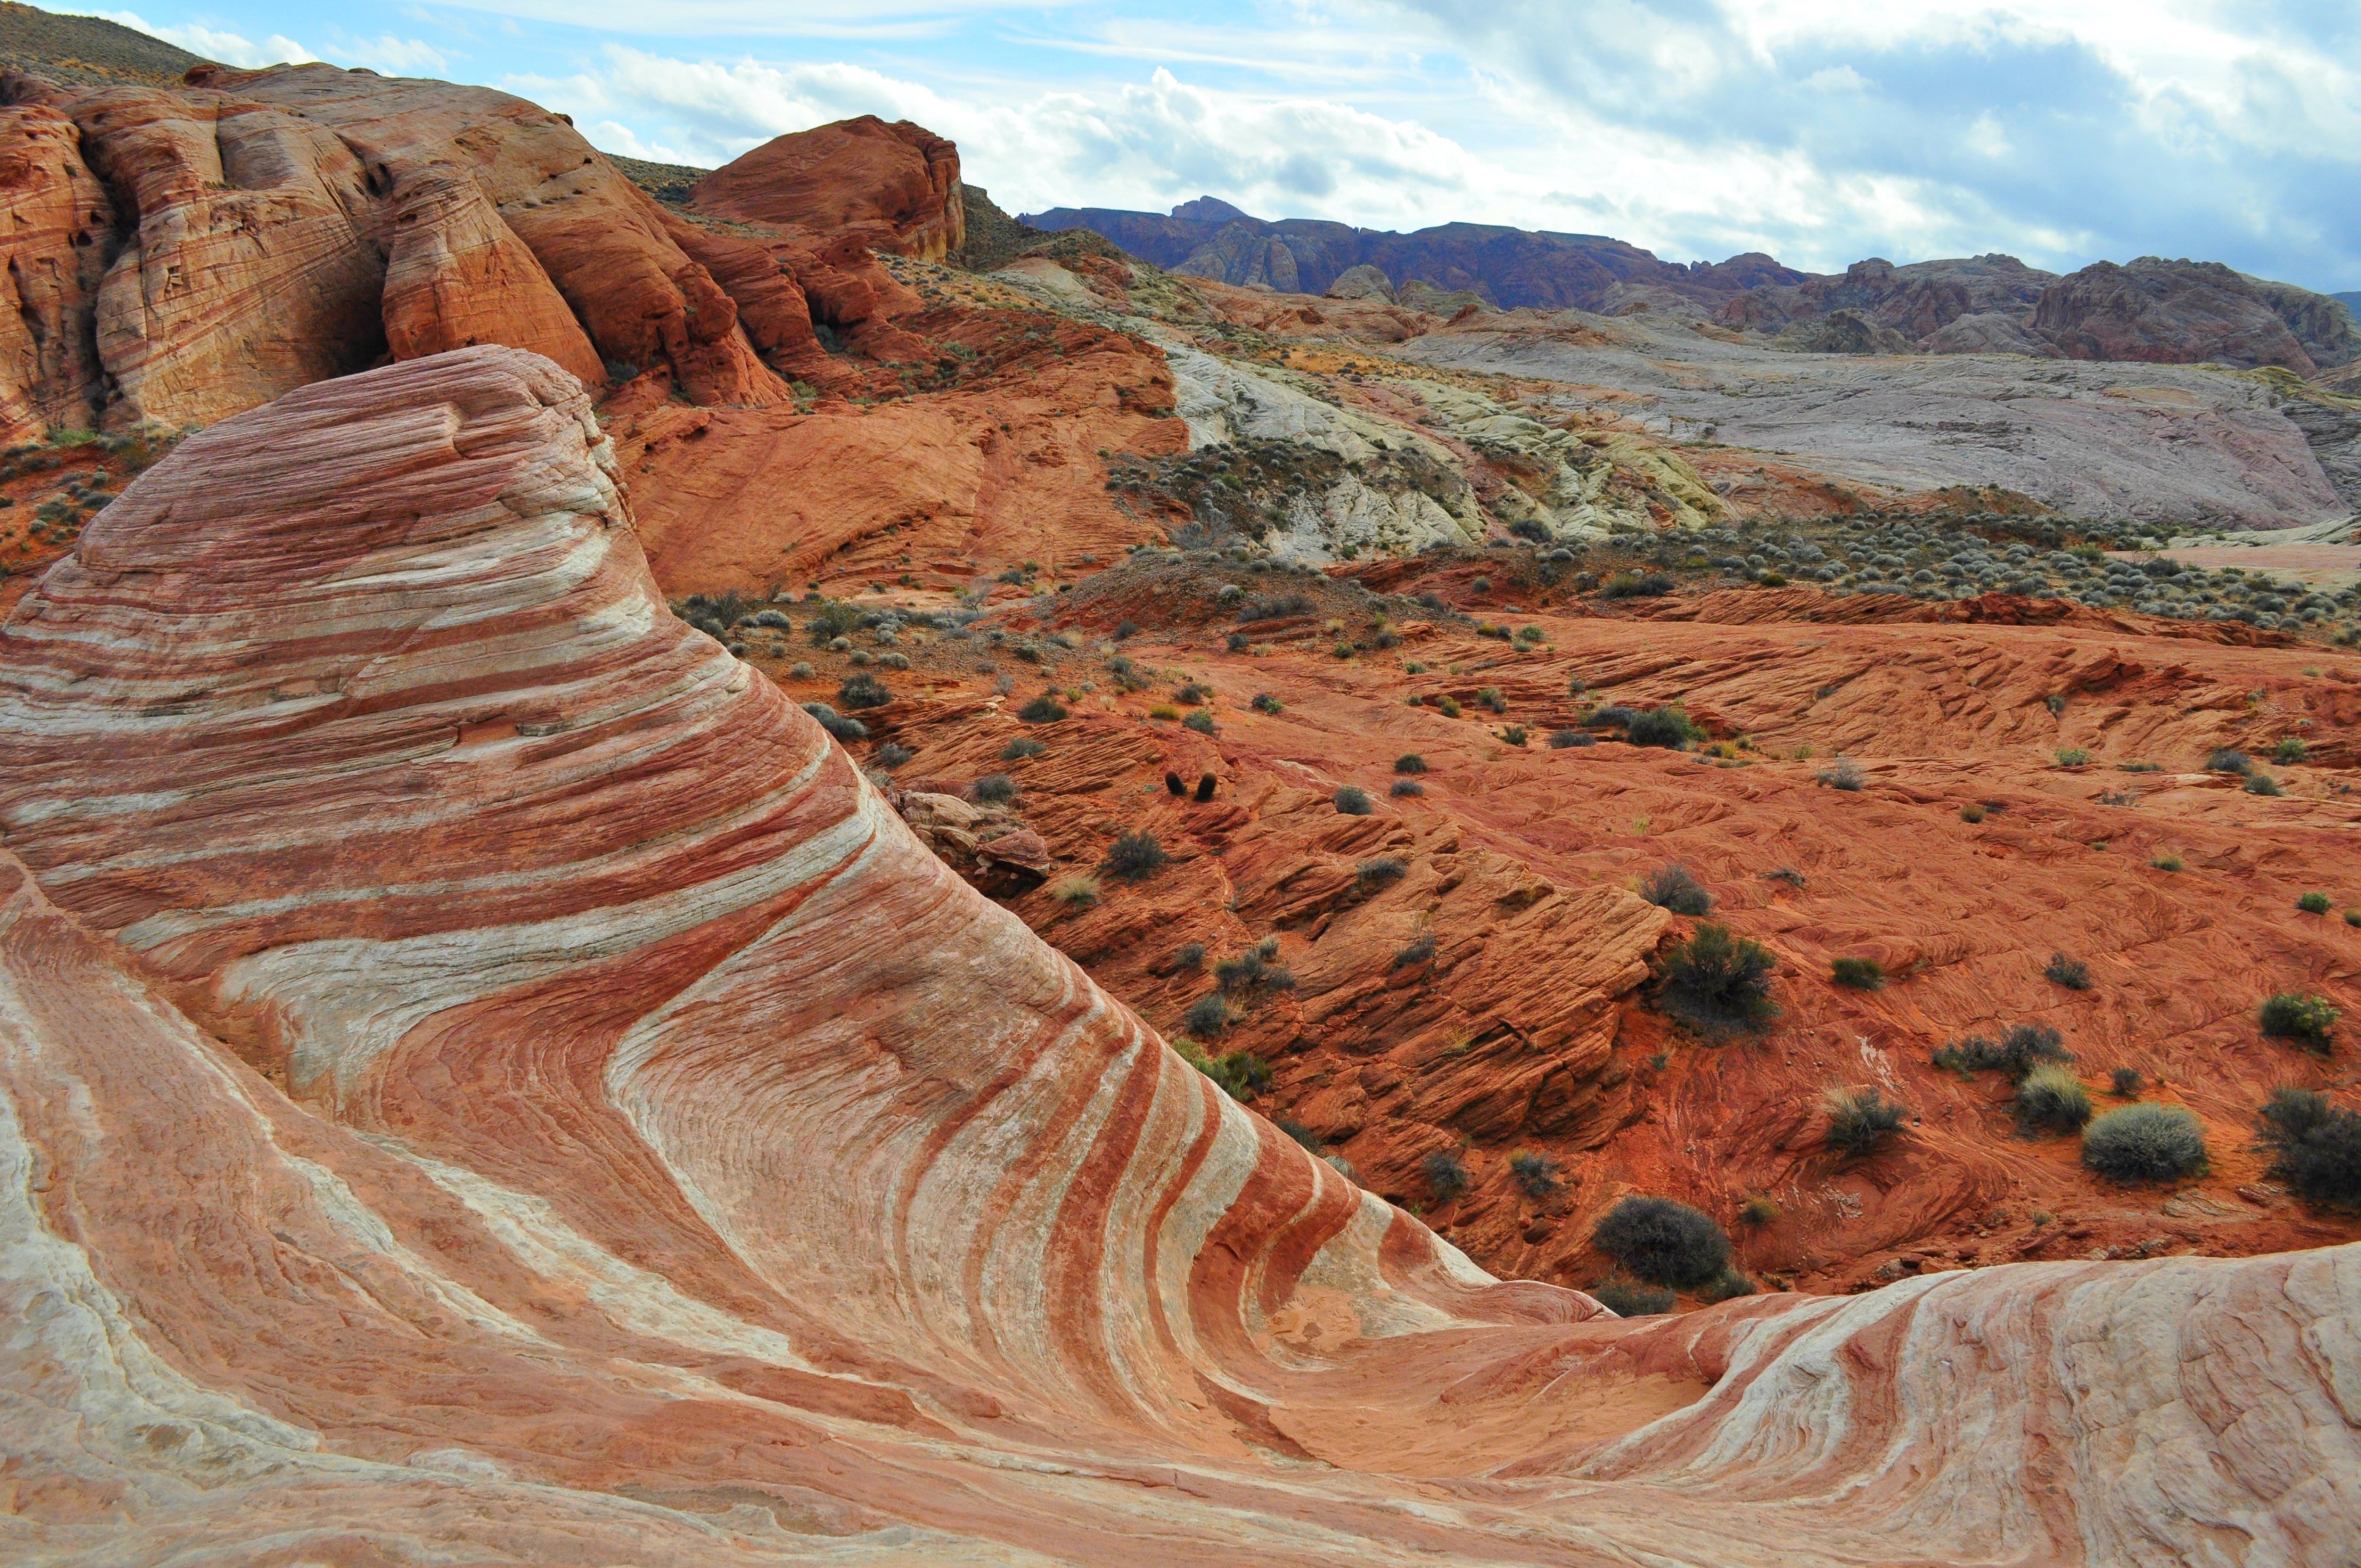 Valley of Fire State Park - Your Hike Guide